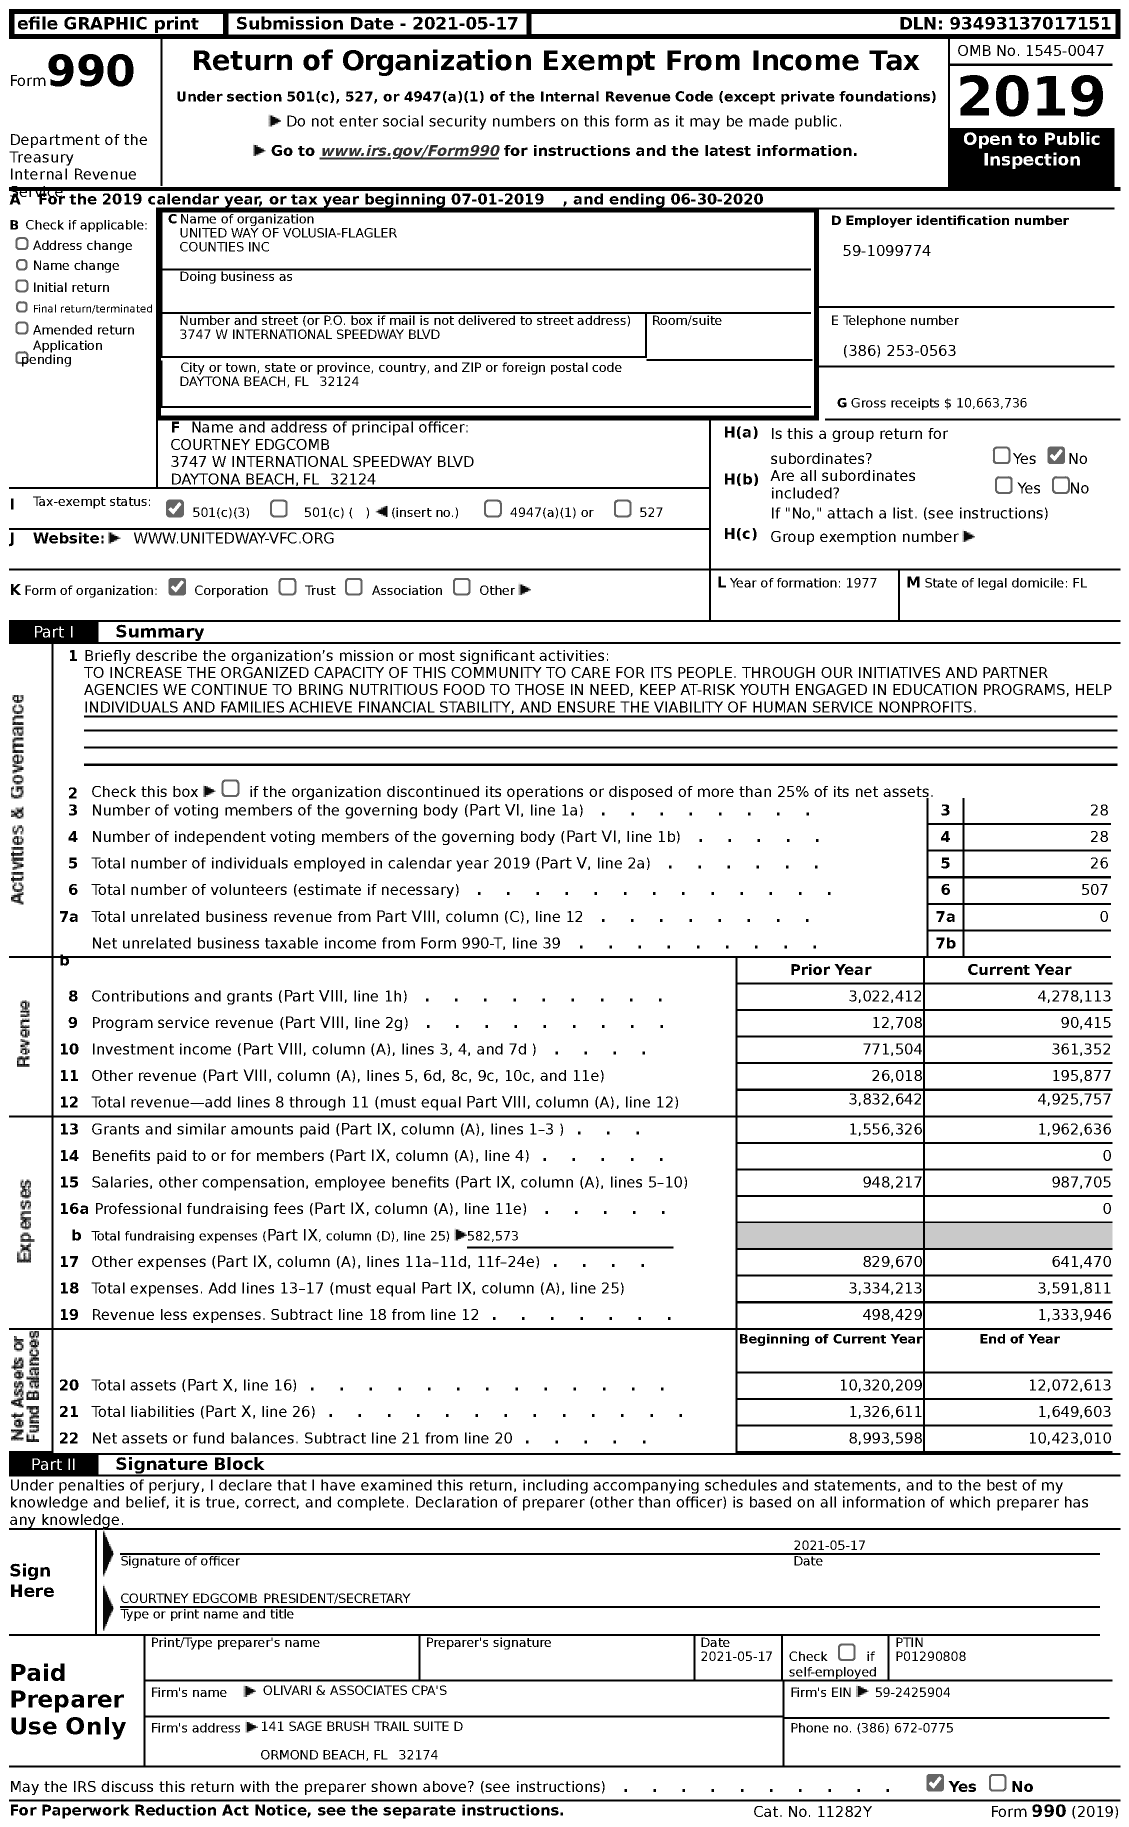 Image of first page of 2019 Form 990 for United Way of Volusia-Flagler Counties